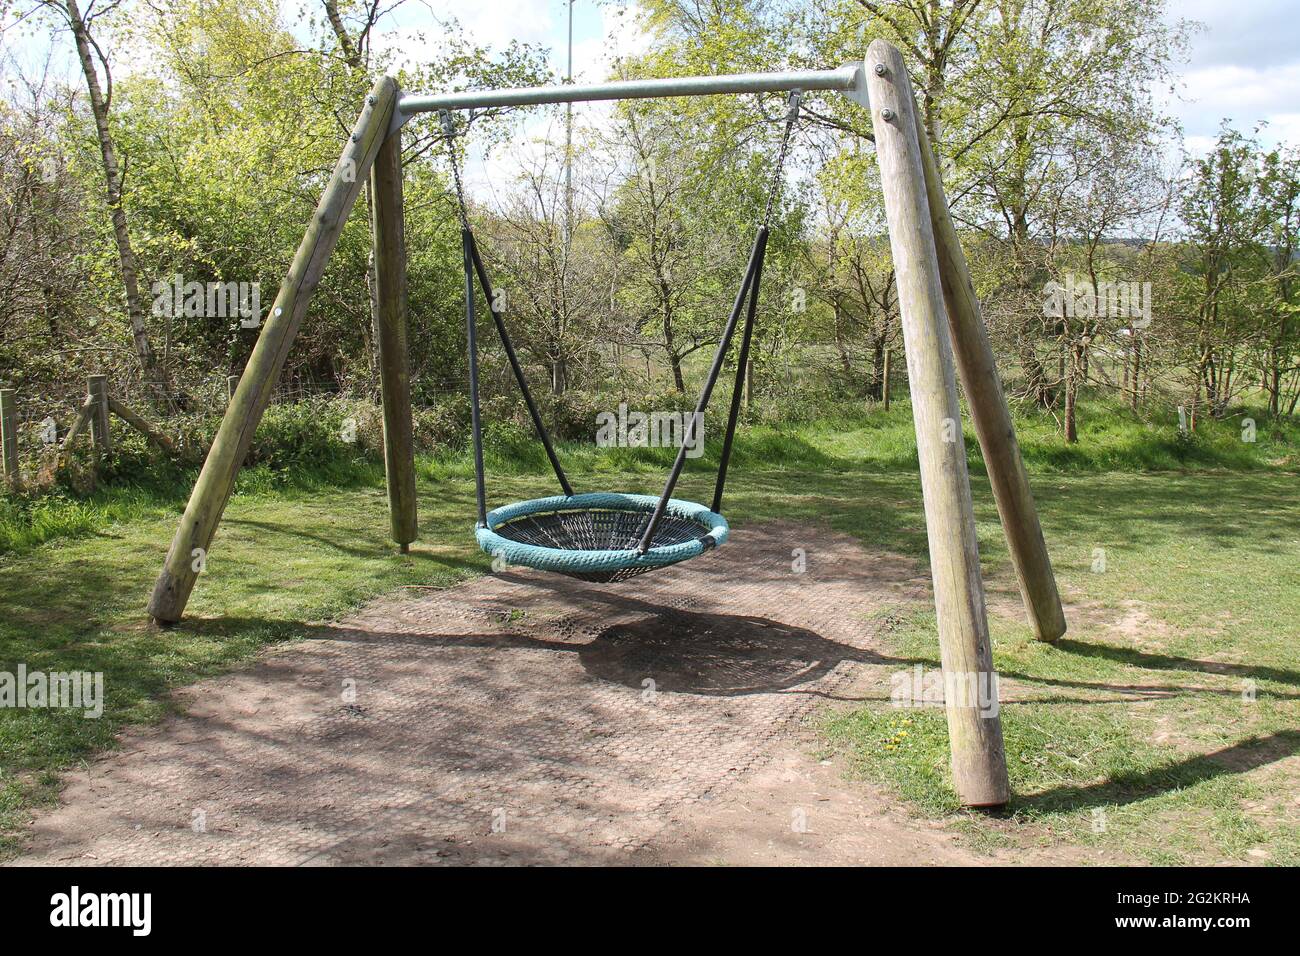 A Round Playground Net Swing on a Large Wooden Frame Stock Photo